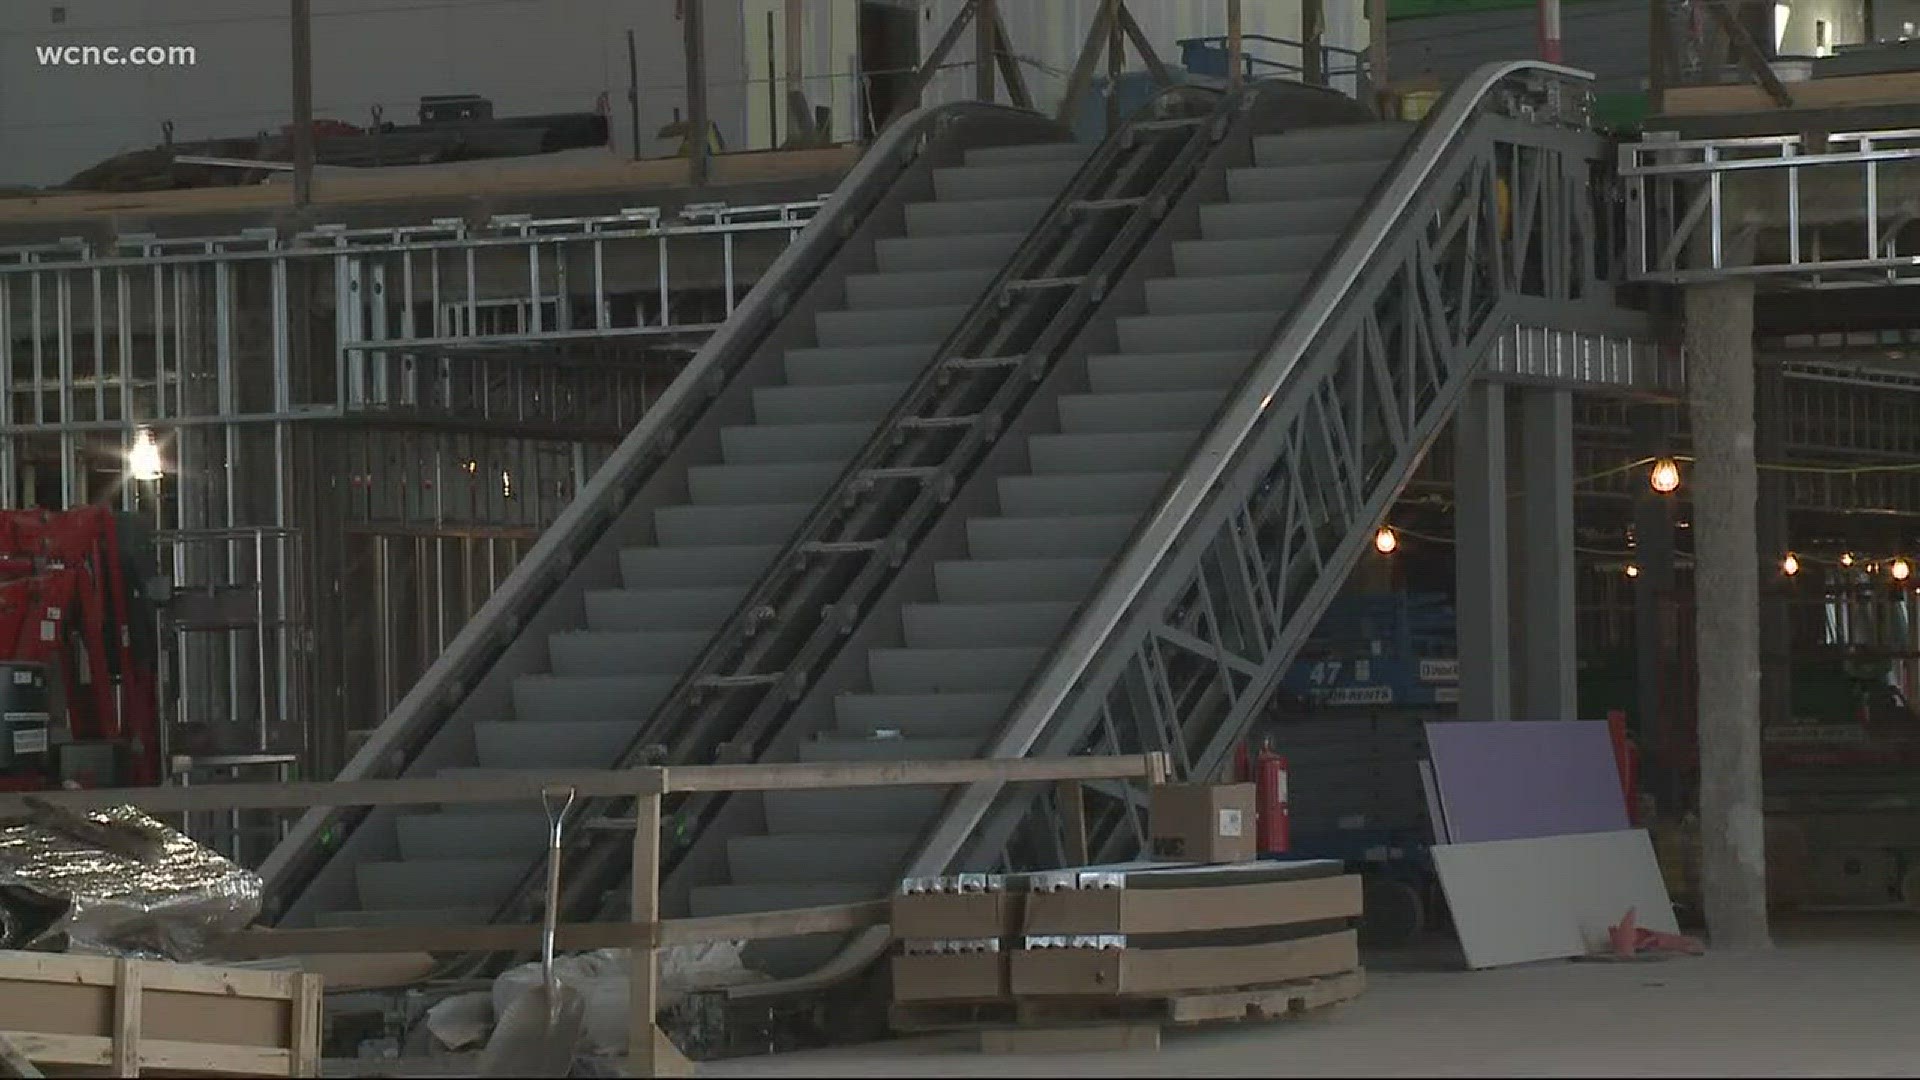 NBC Charlotte is getting a first-hand look at the newly expanded Concourse A.